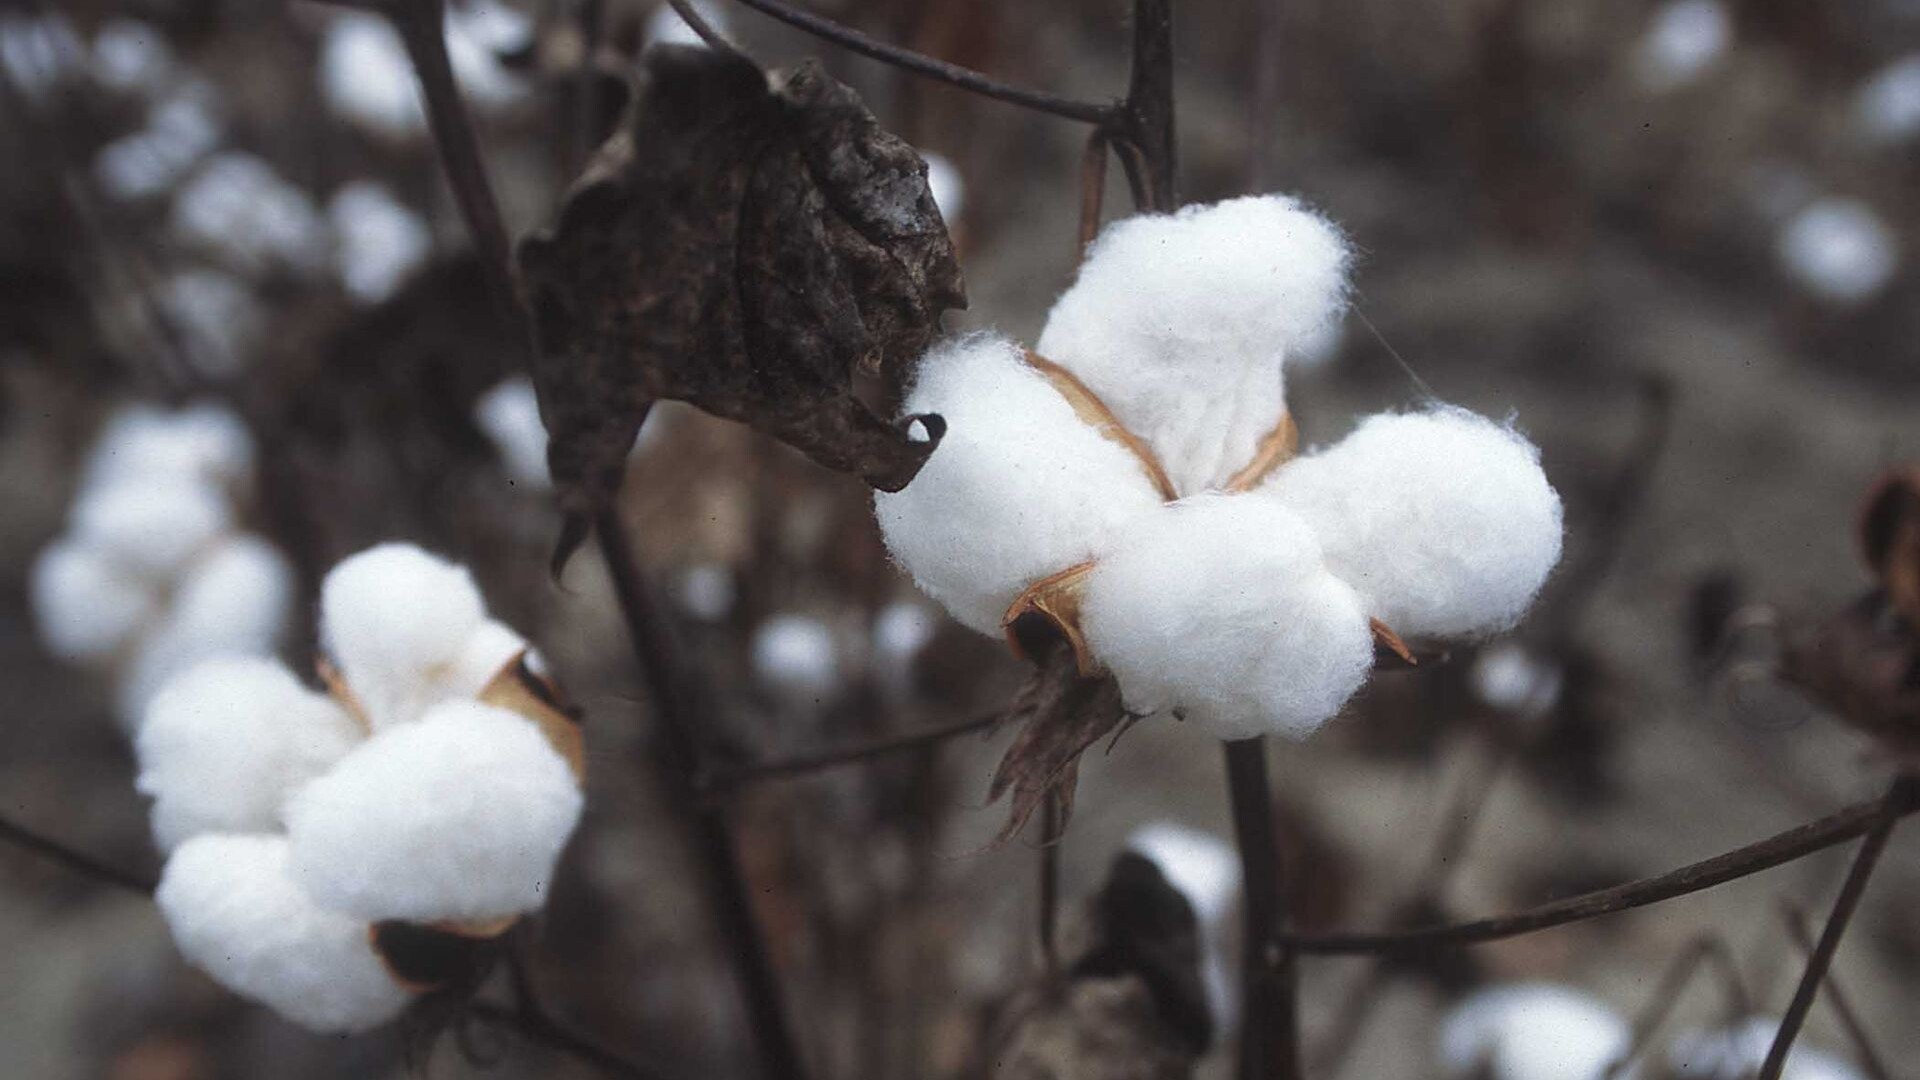 Bangladesh Lifting a Nearly 50-Year Requirement for U.S. Cotton